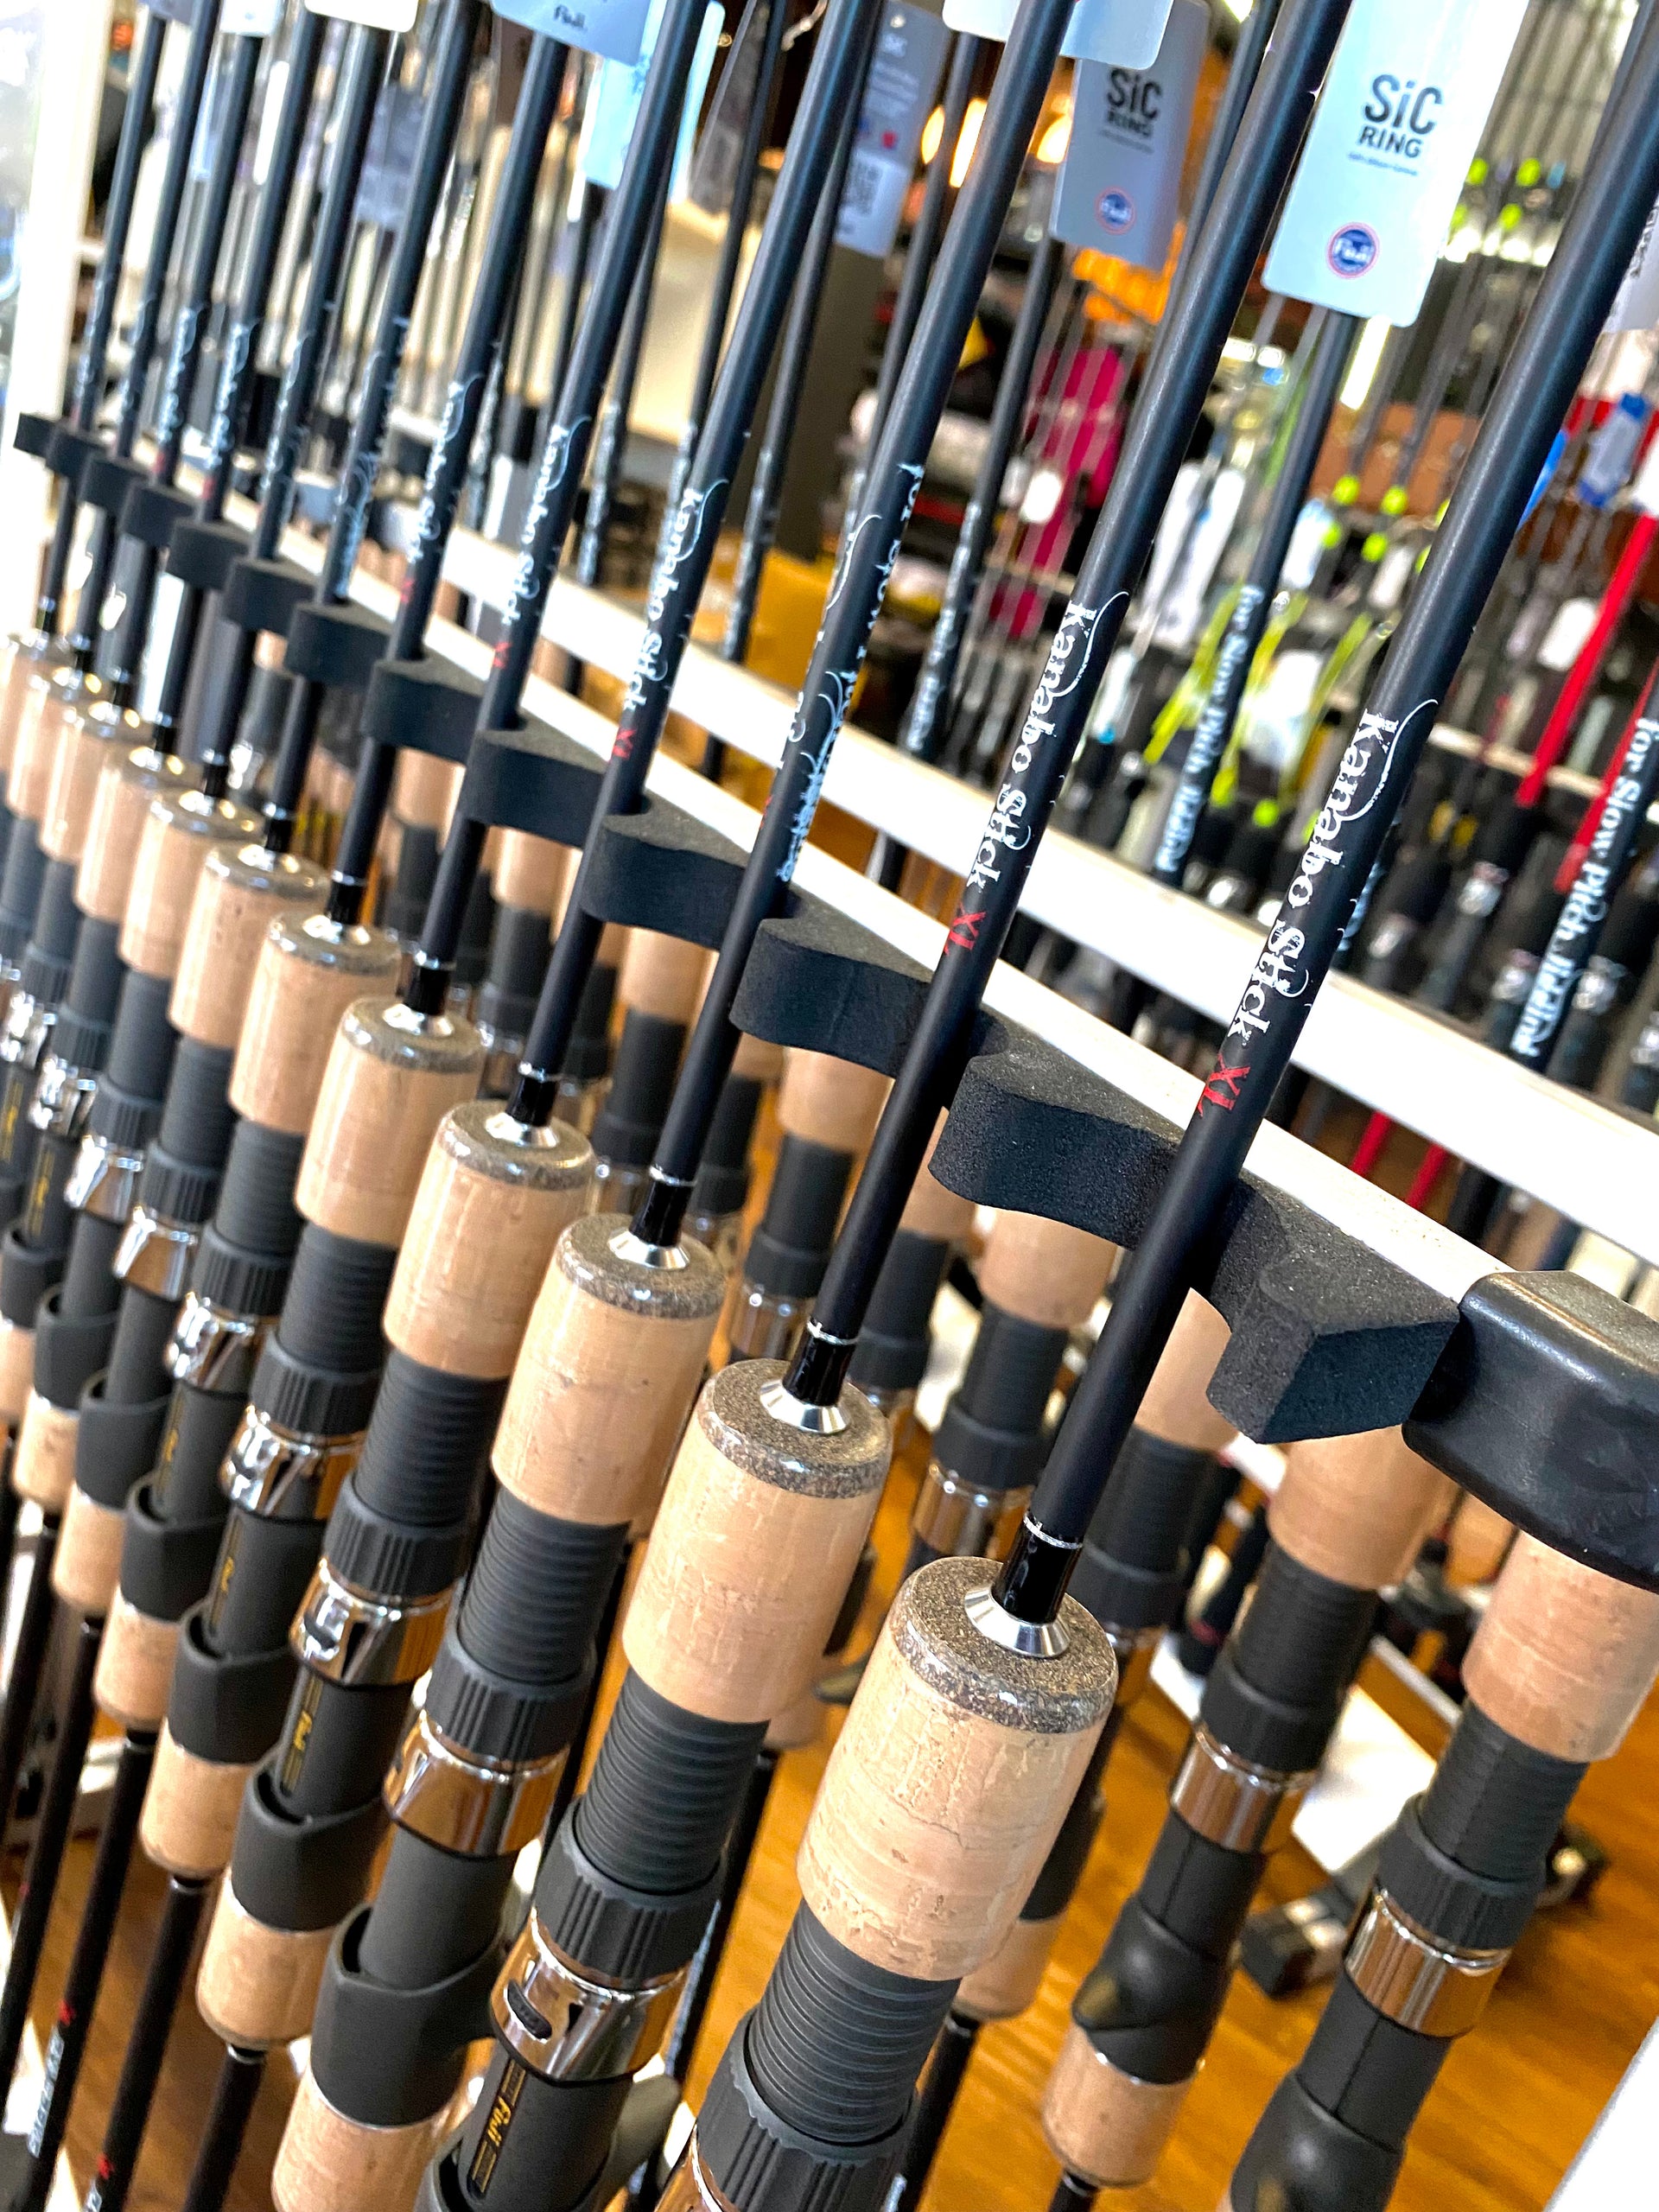 Storing Jigs on Slow Pitch Rods, Page 2